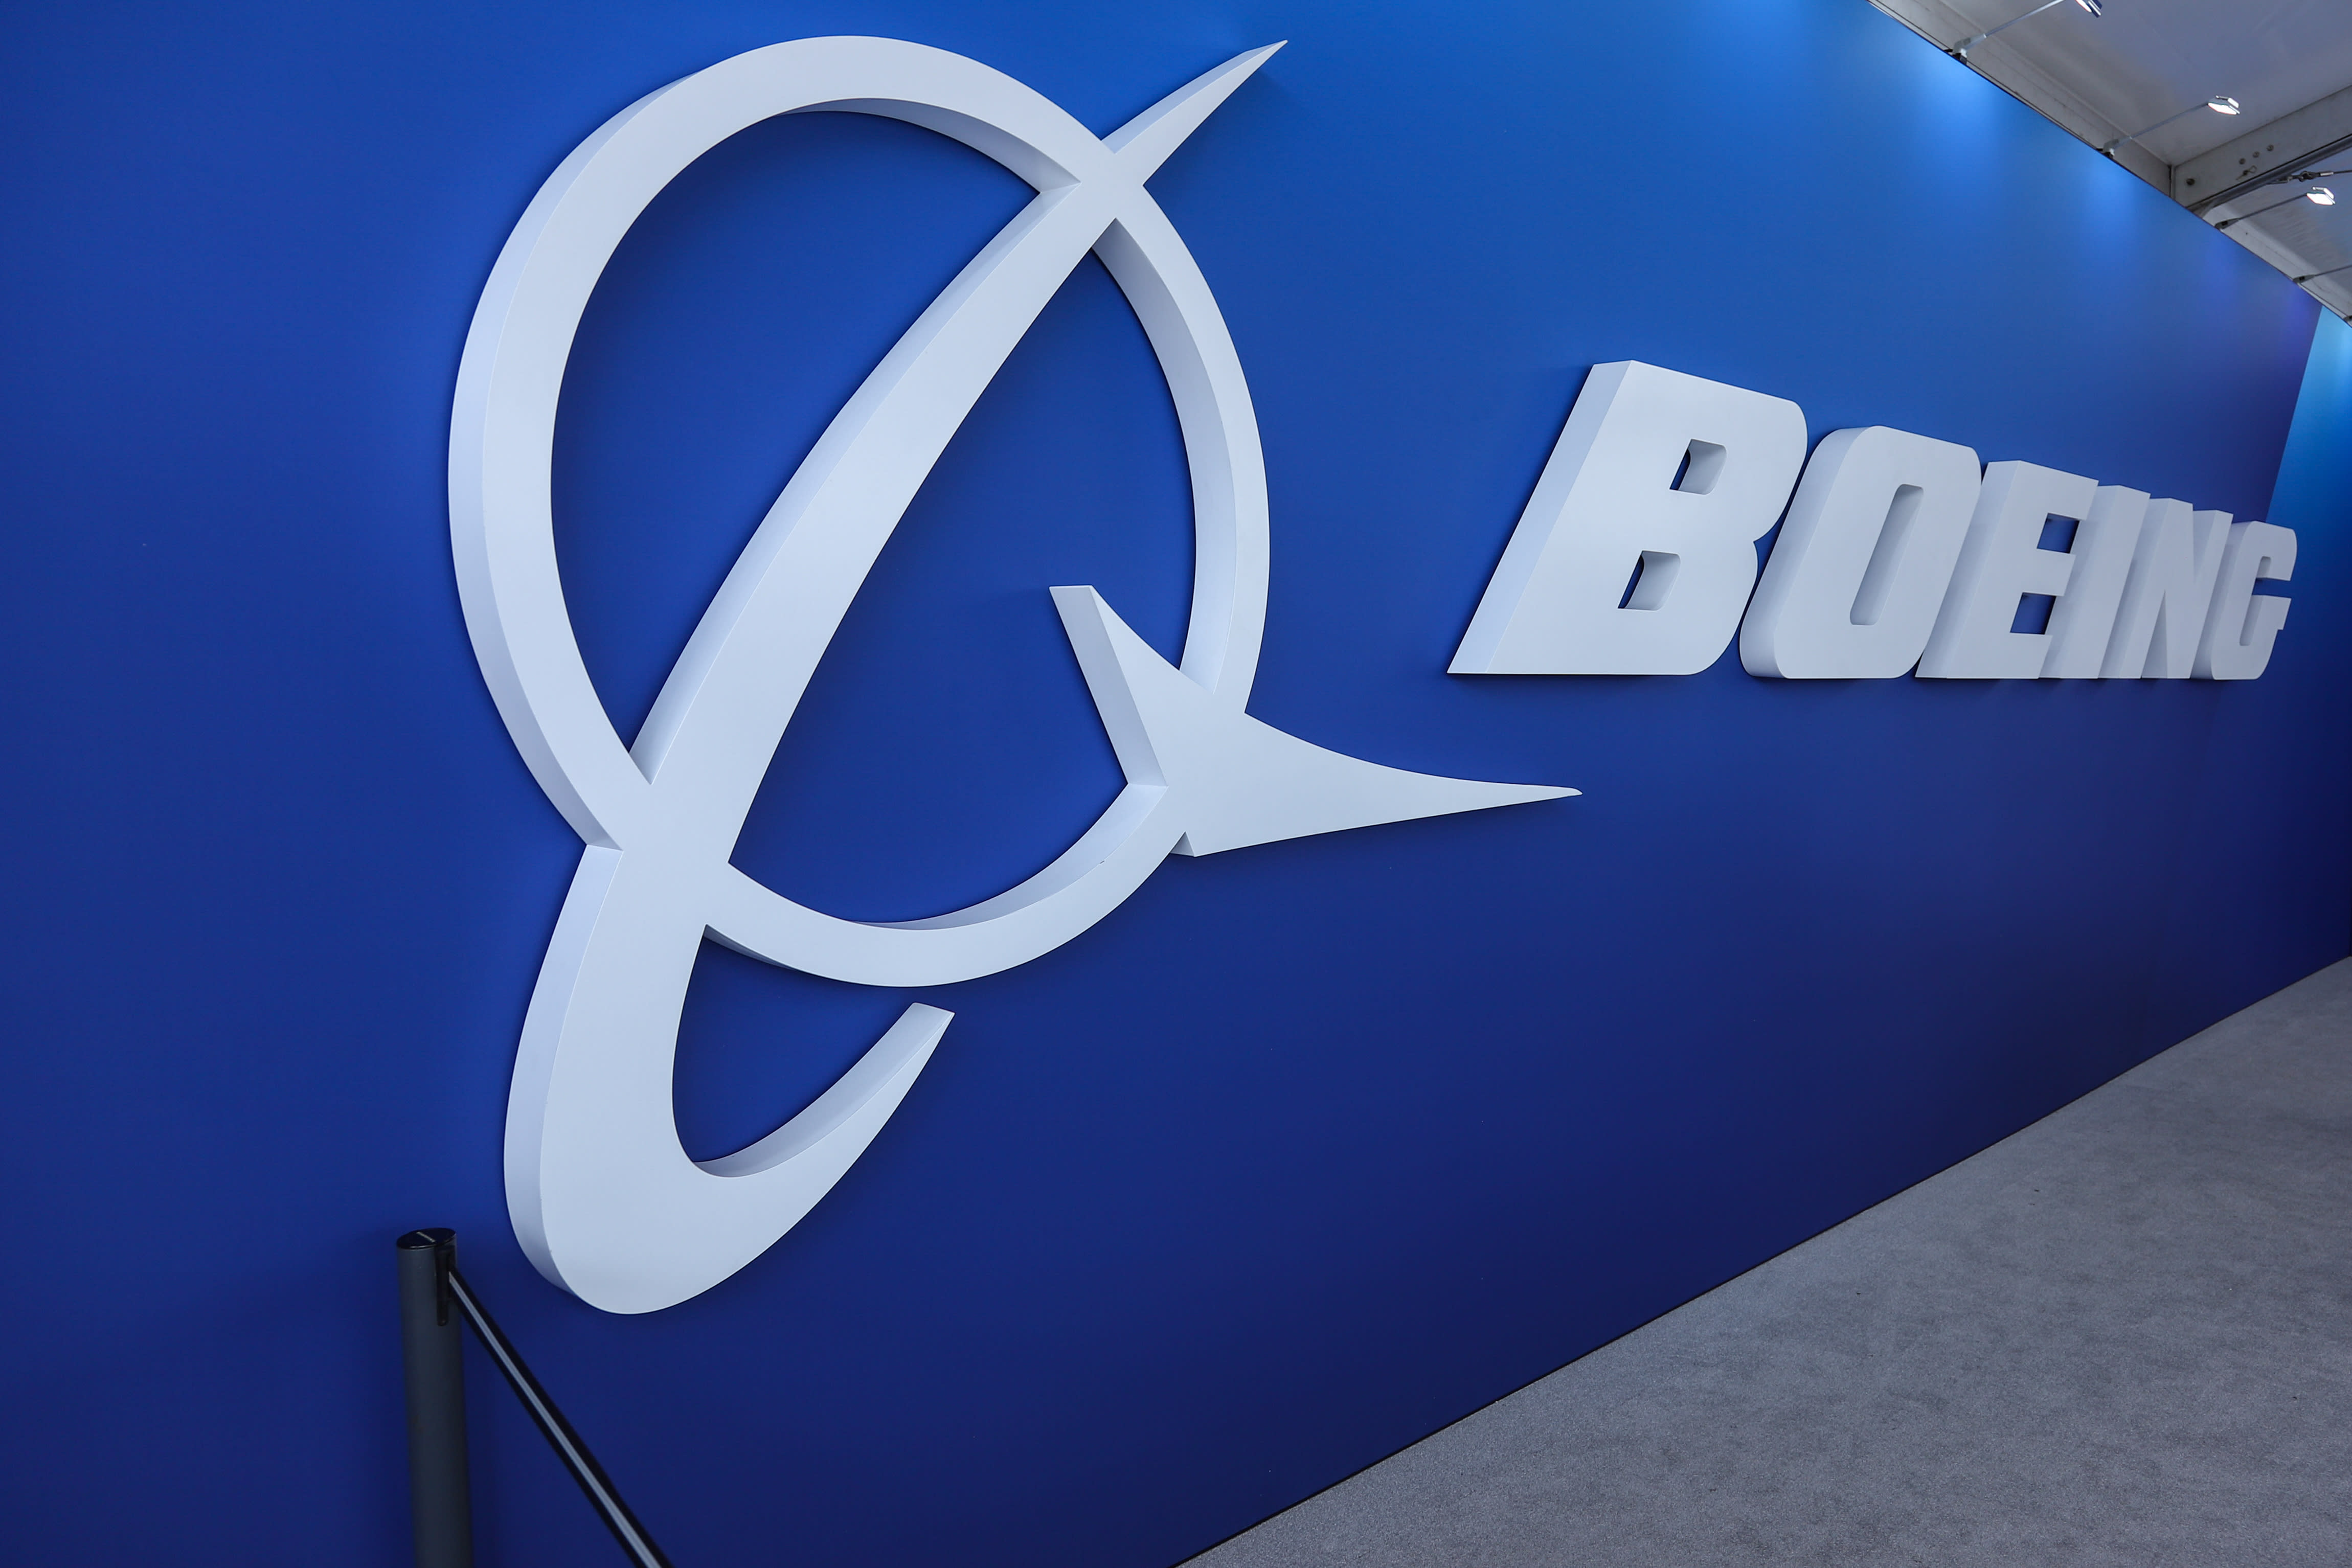 Jim Cramer looks positive on Boeing after the stock was hit at 737 Max